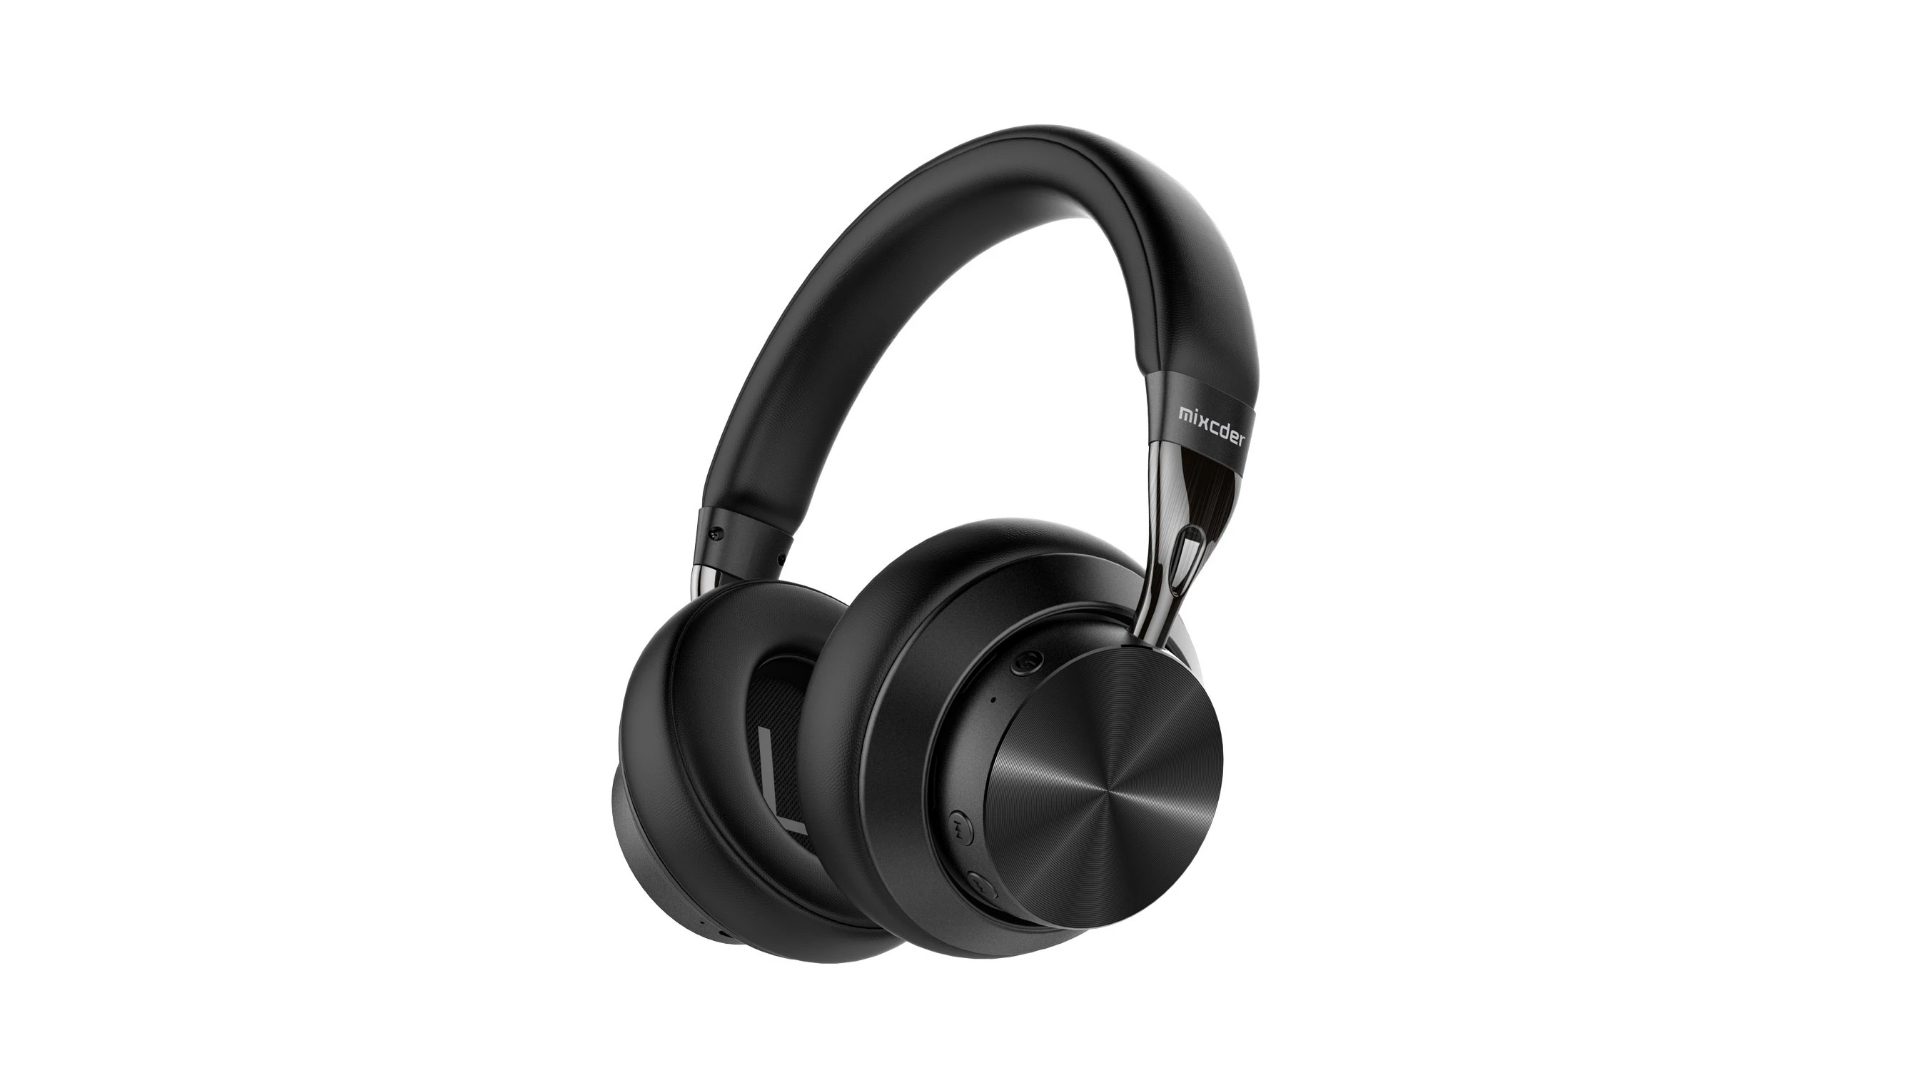 Mixcder Launches Award-Winning E10 Active Noise Canceling Headphones